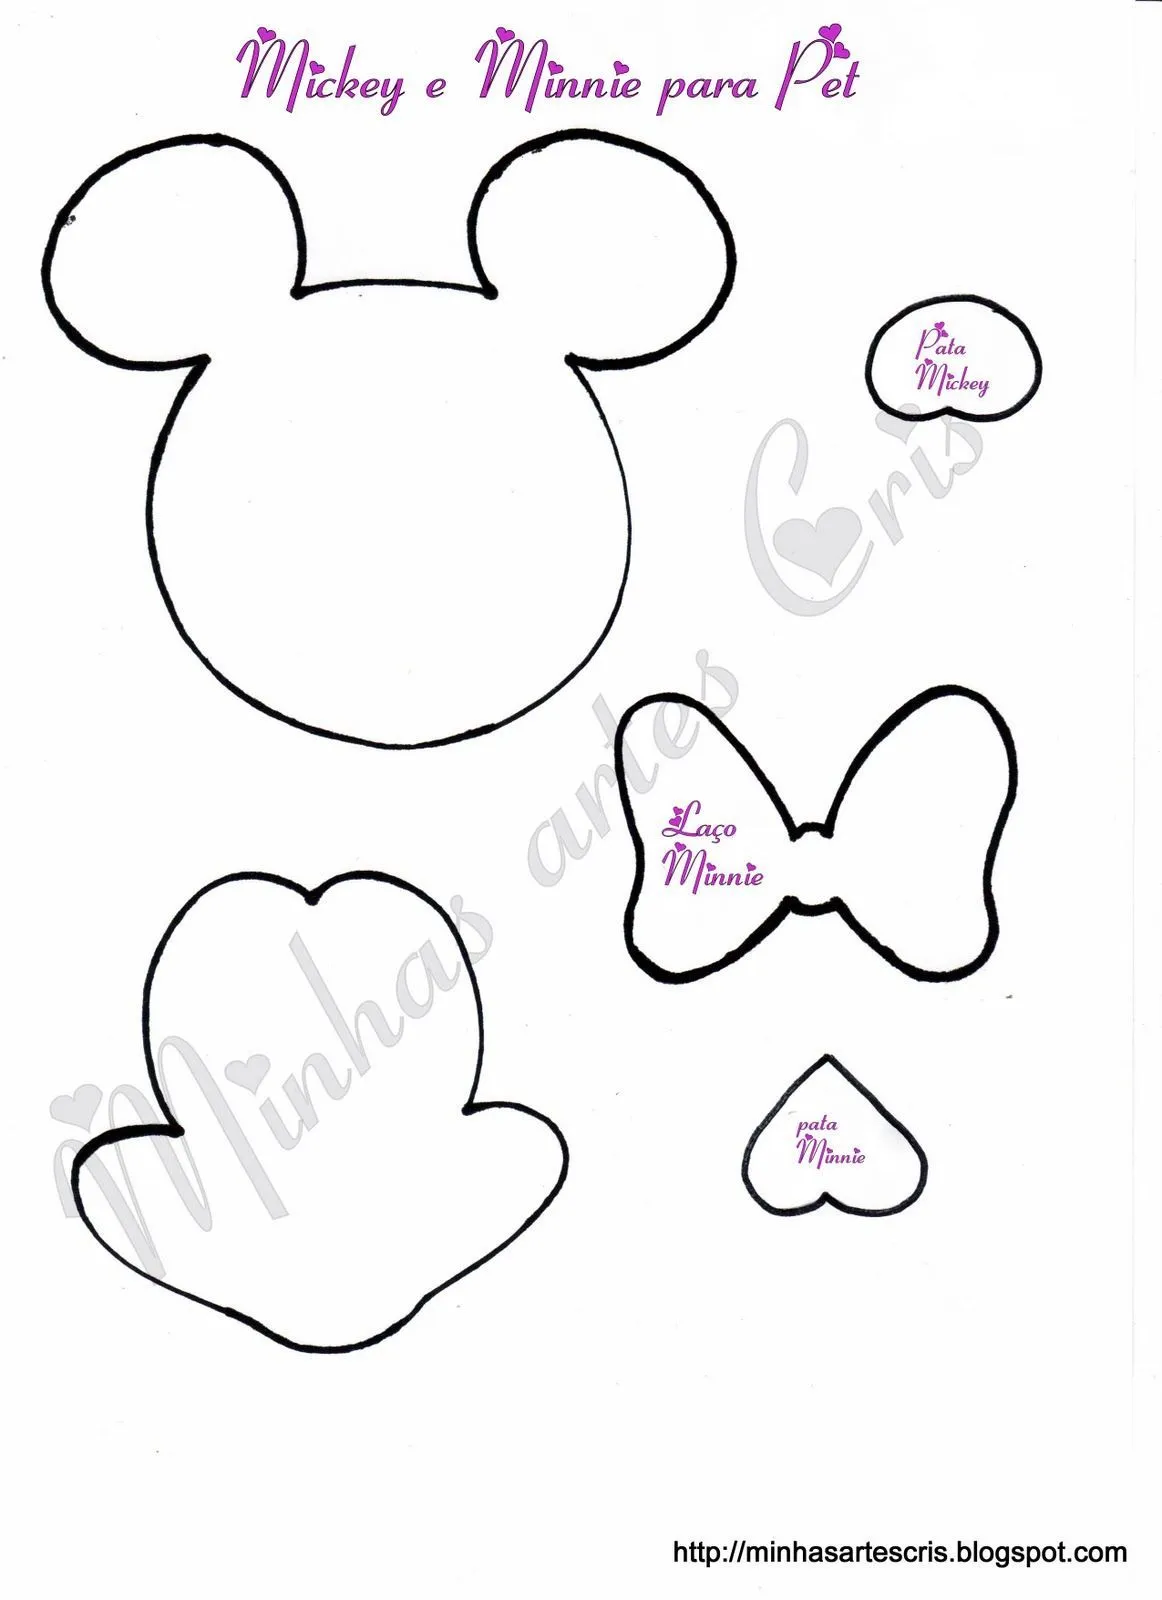 Pin 814272 Molde Cara Minnie Para Pintar Wallpapers Real Madrid On ... | Mickey  mouse silhouette, Disney quilt, Memory bears pattern